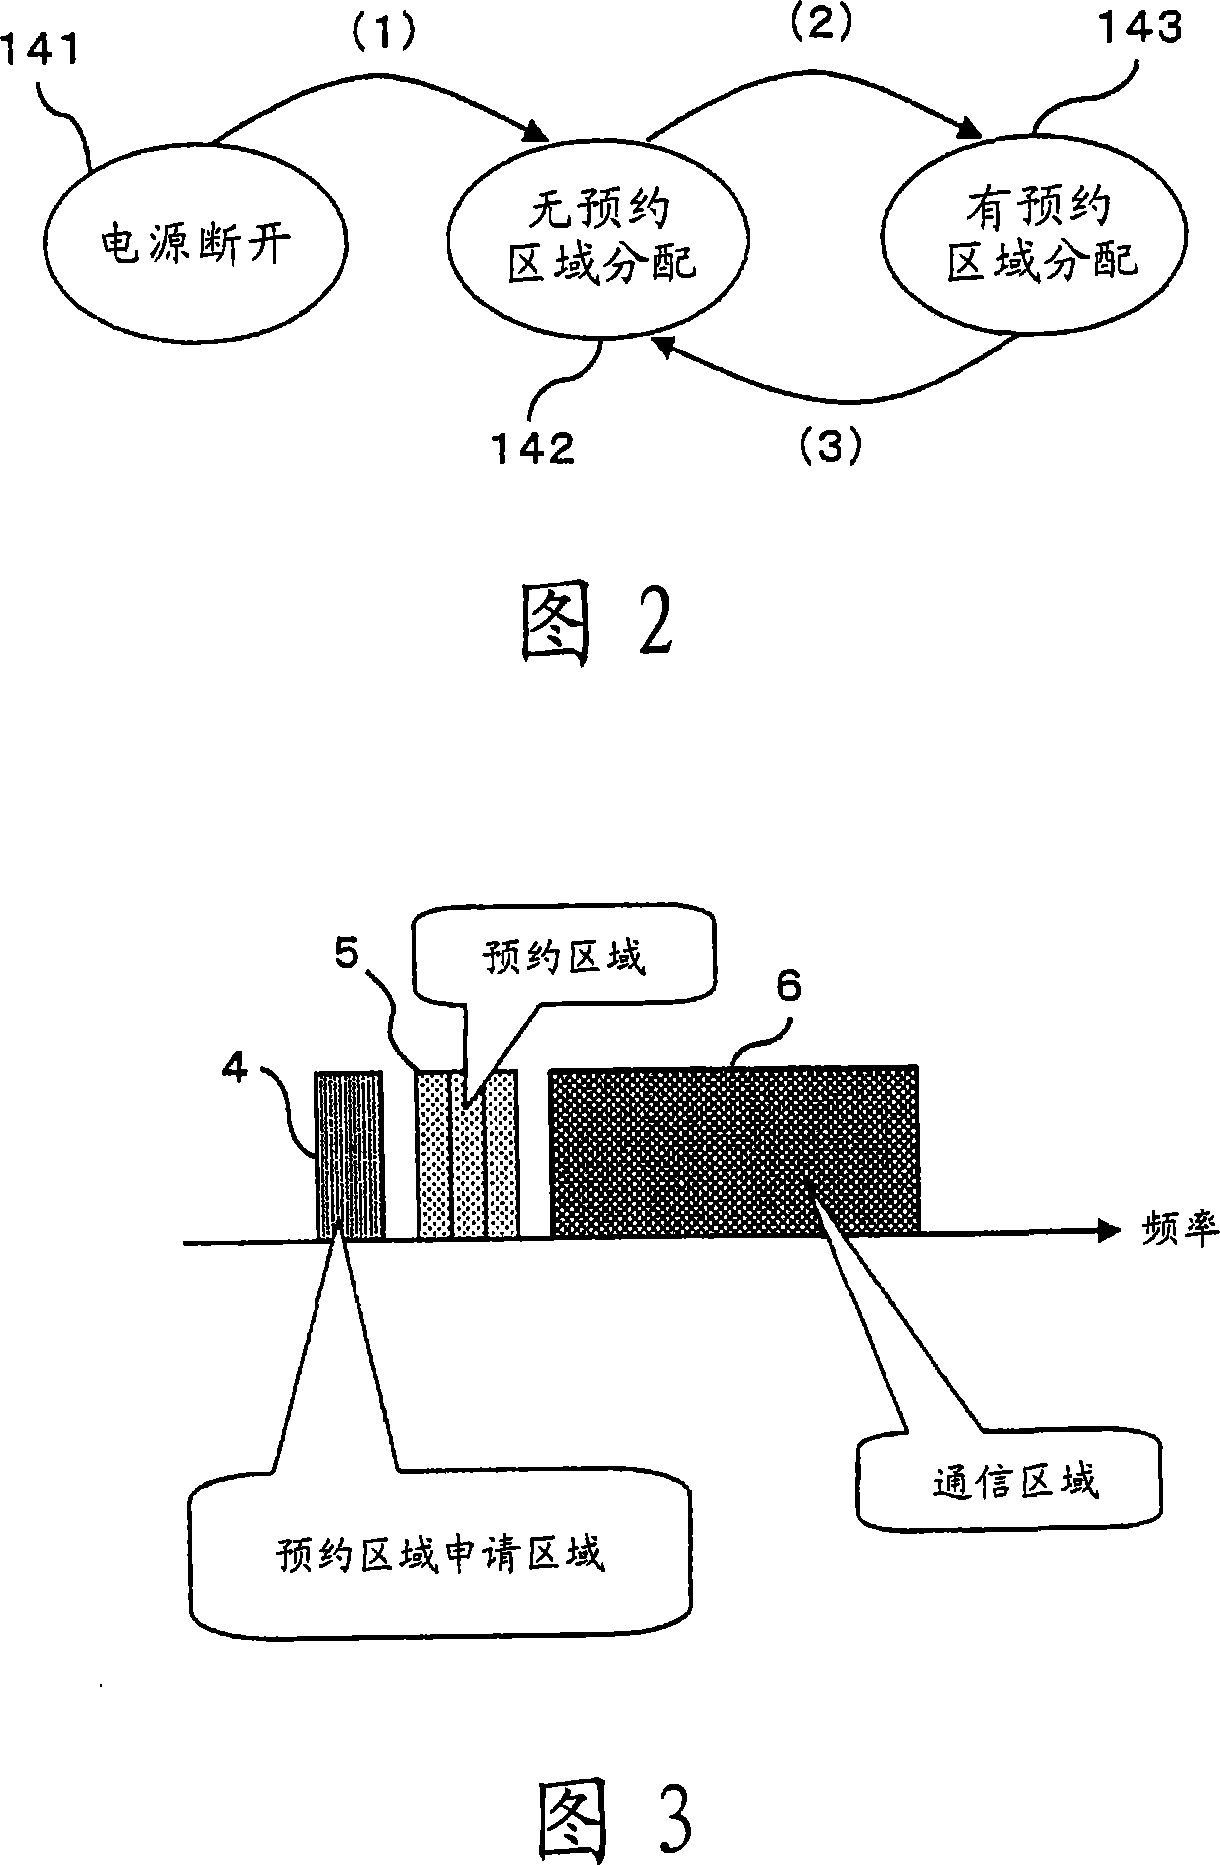 Wireless communication system, and base station and terminals used in that system